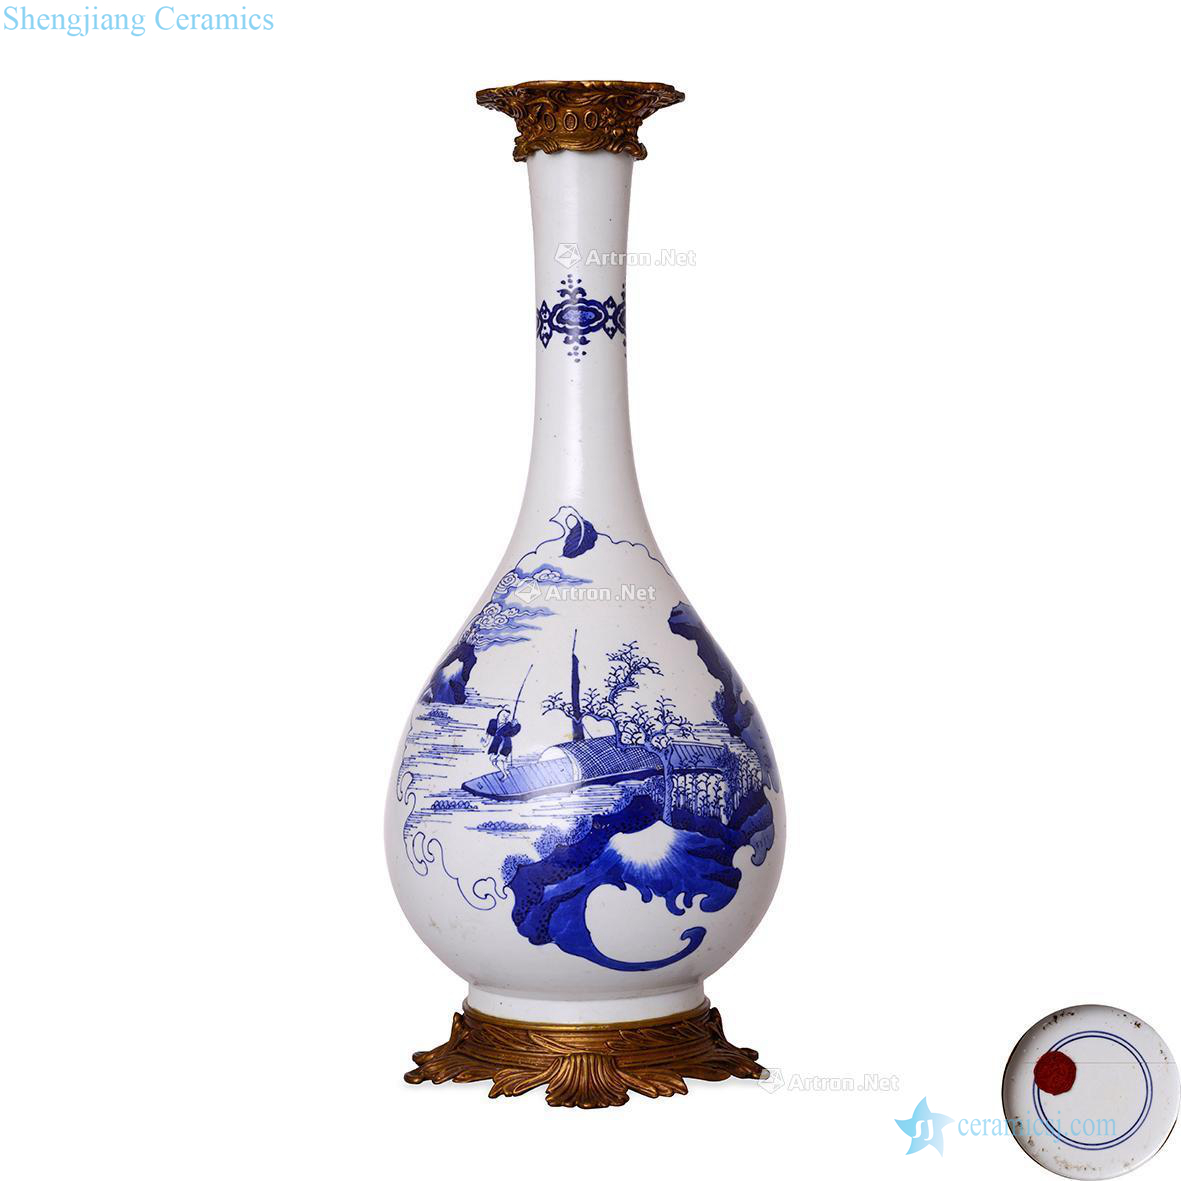 In the qing dynasty Blue and white landscape figure BaoJinChang gall bladder neck